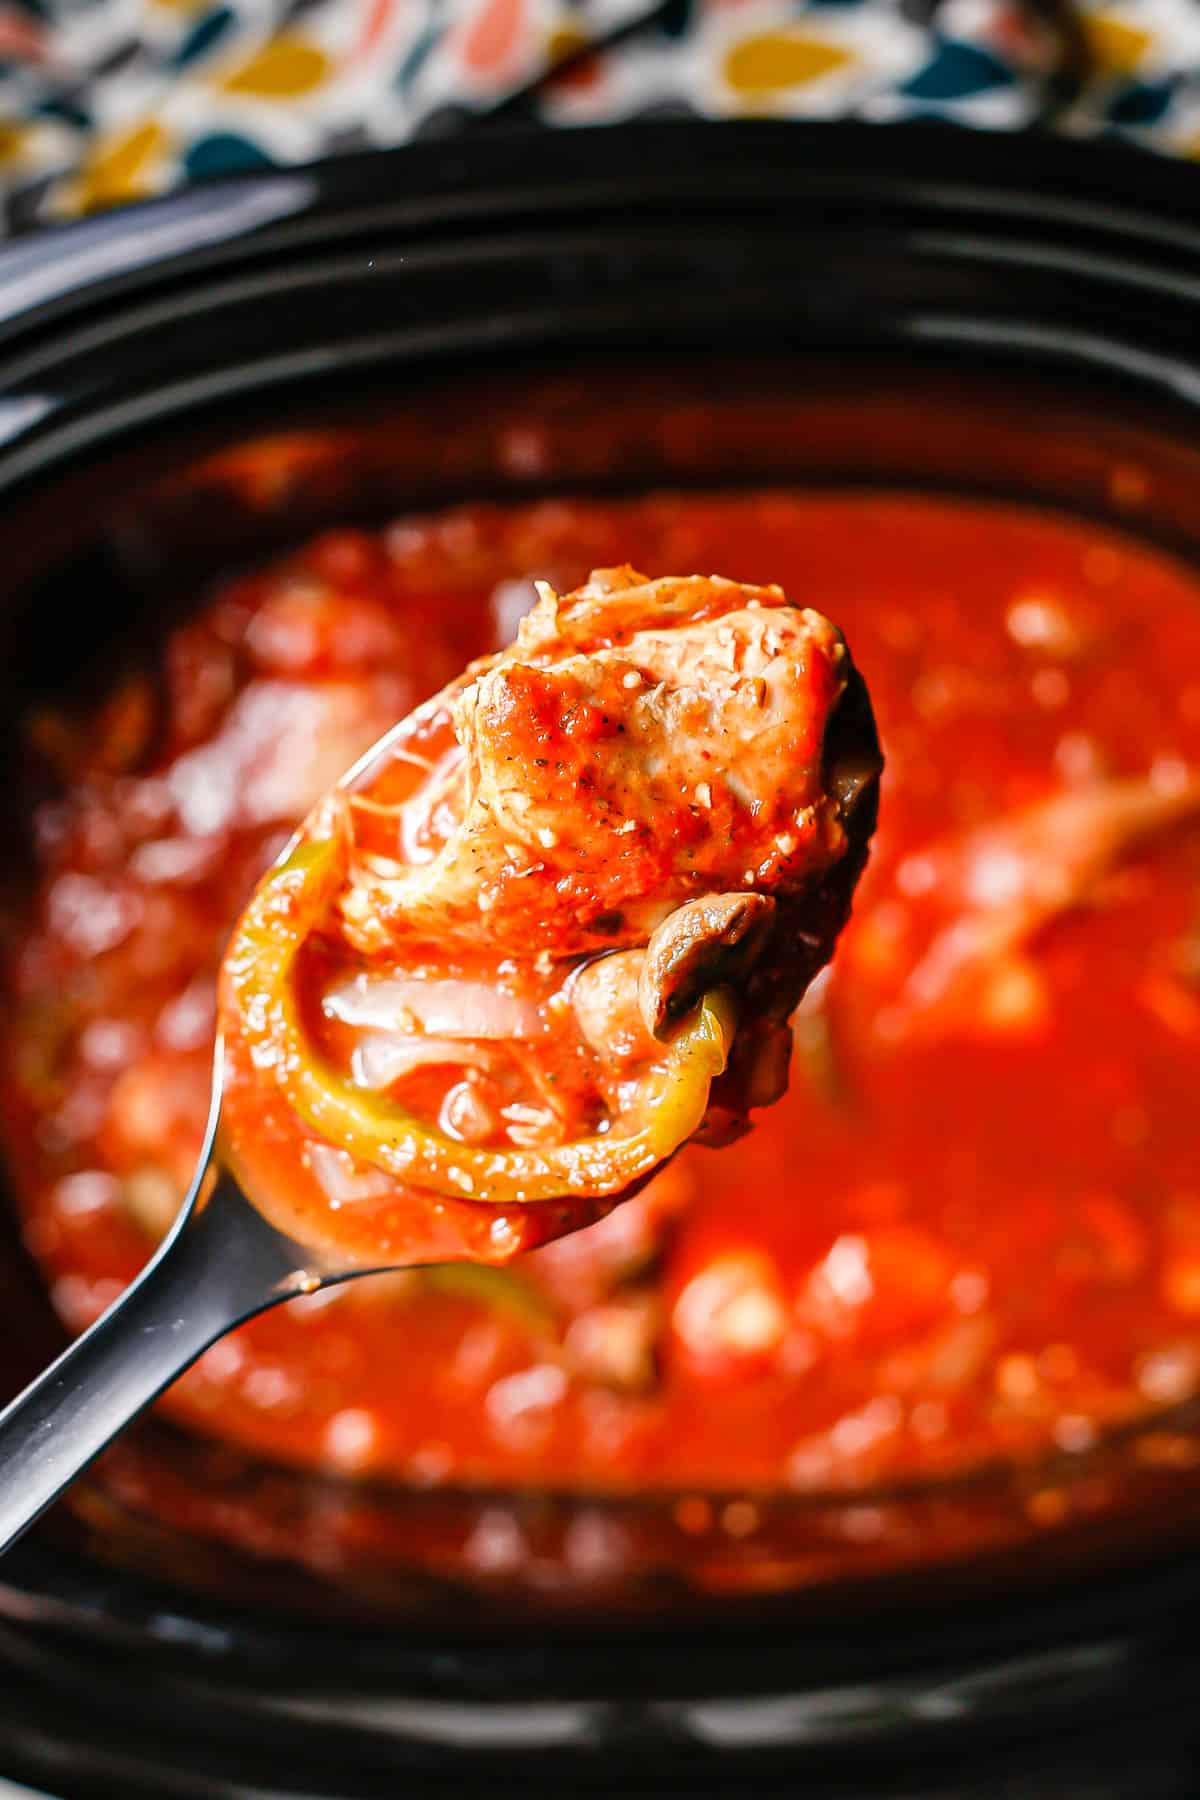 A spoon lifting up chicken and veggies in a red sauce from a crock pot.